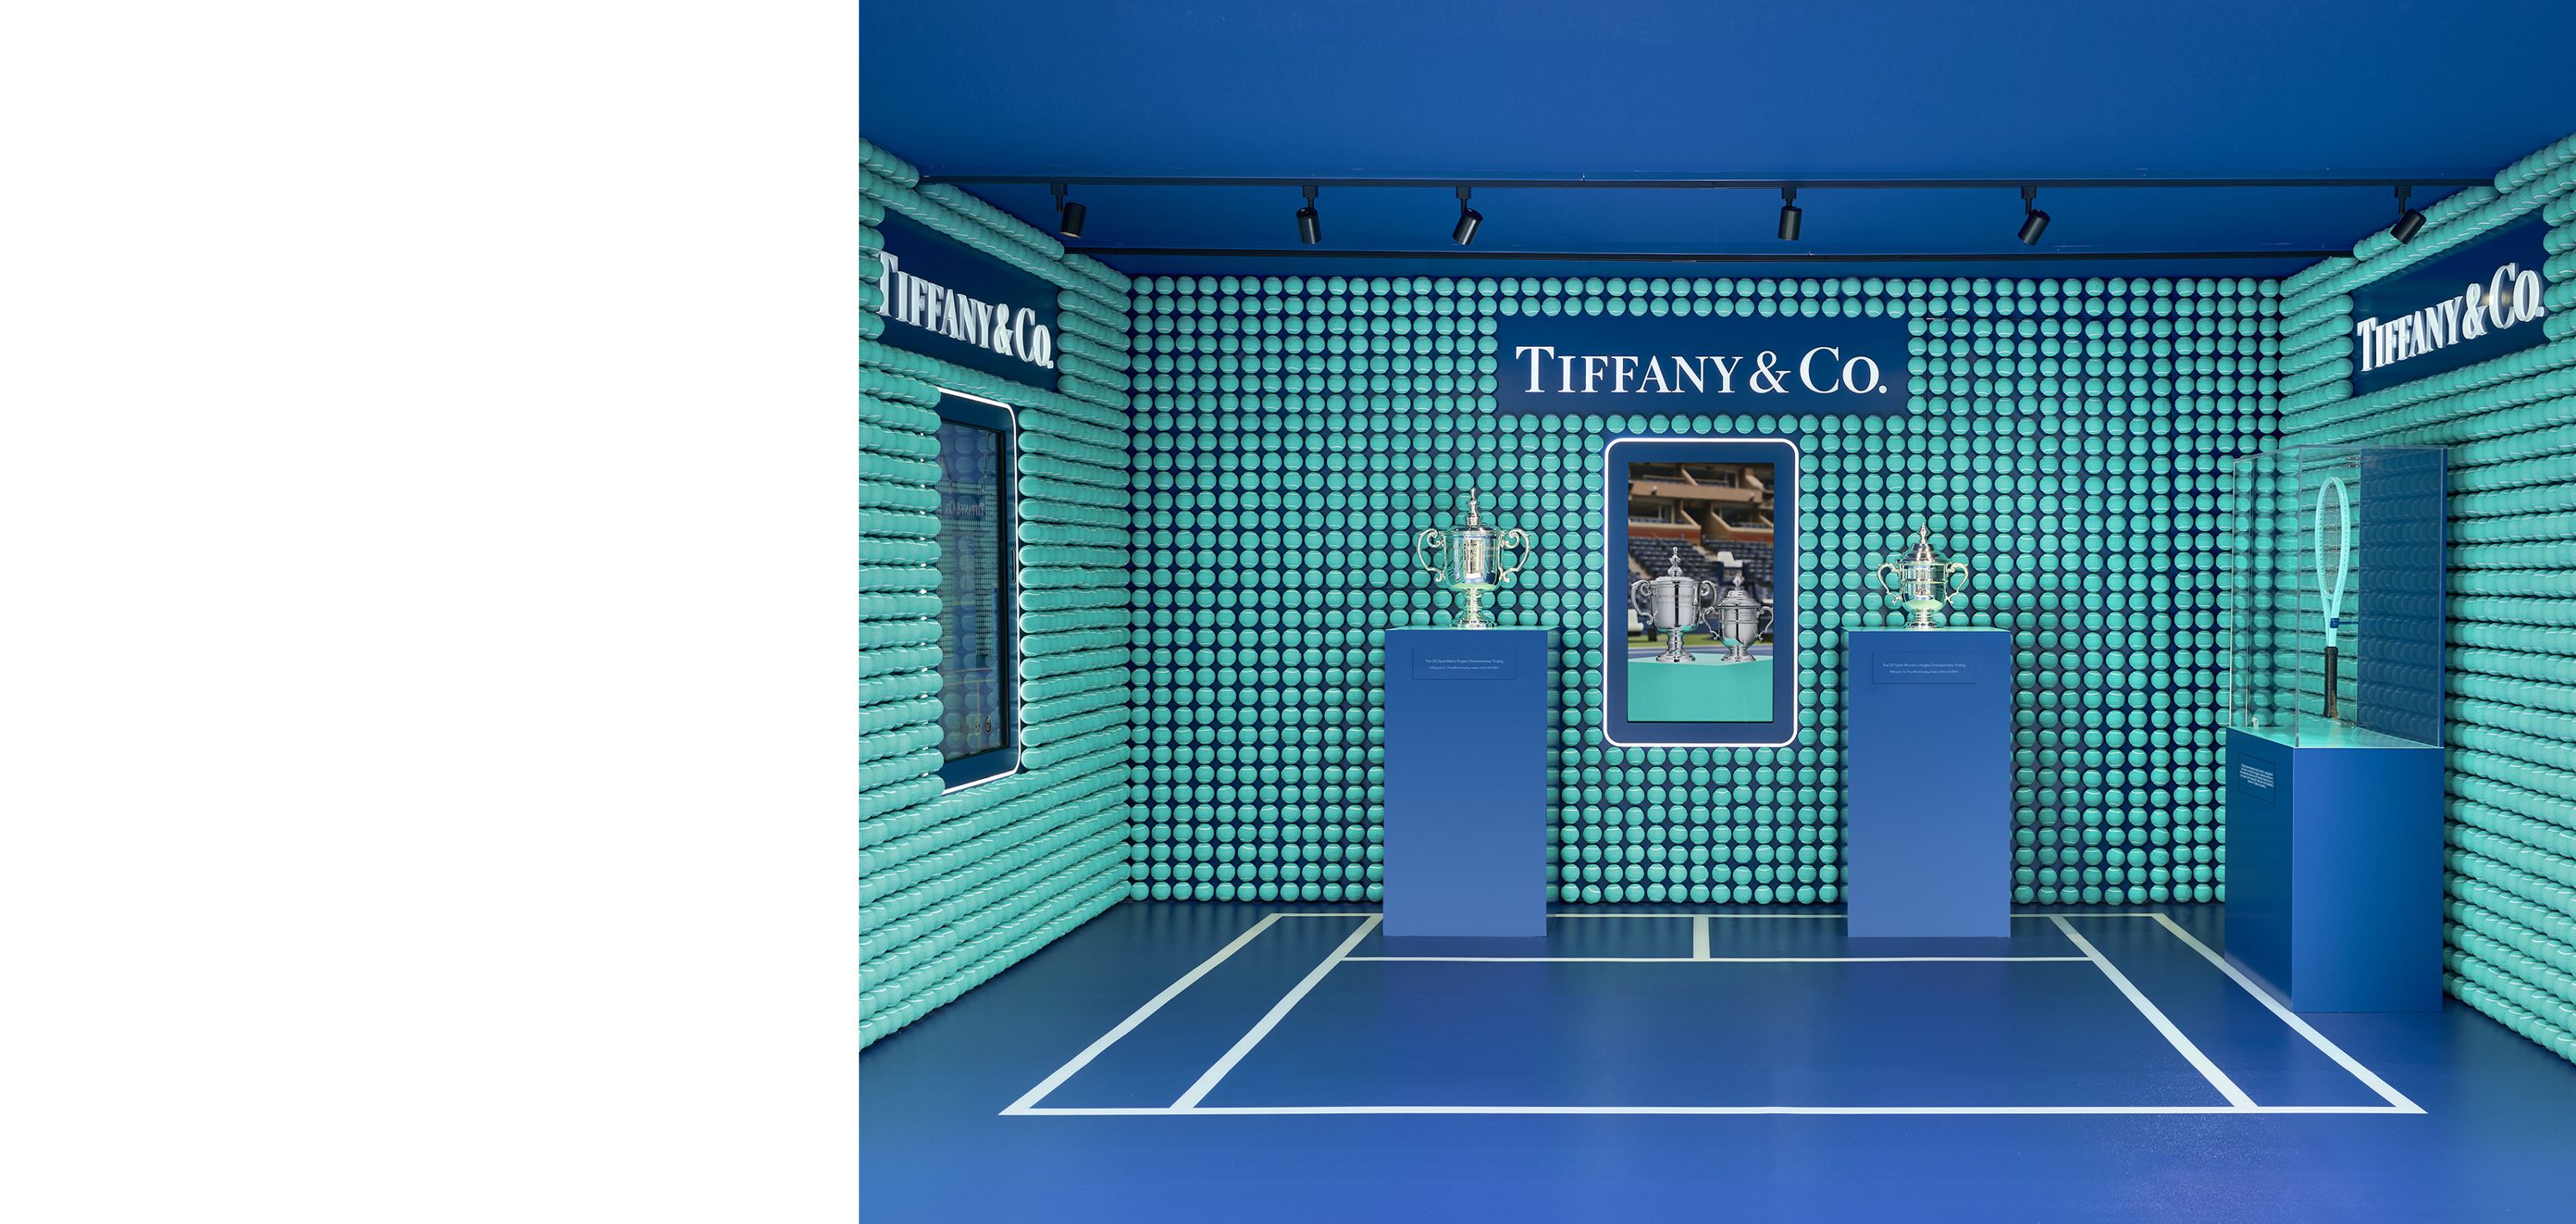 Tiffany & Co. has proudly crafted the World Baseball Classic